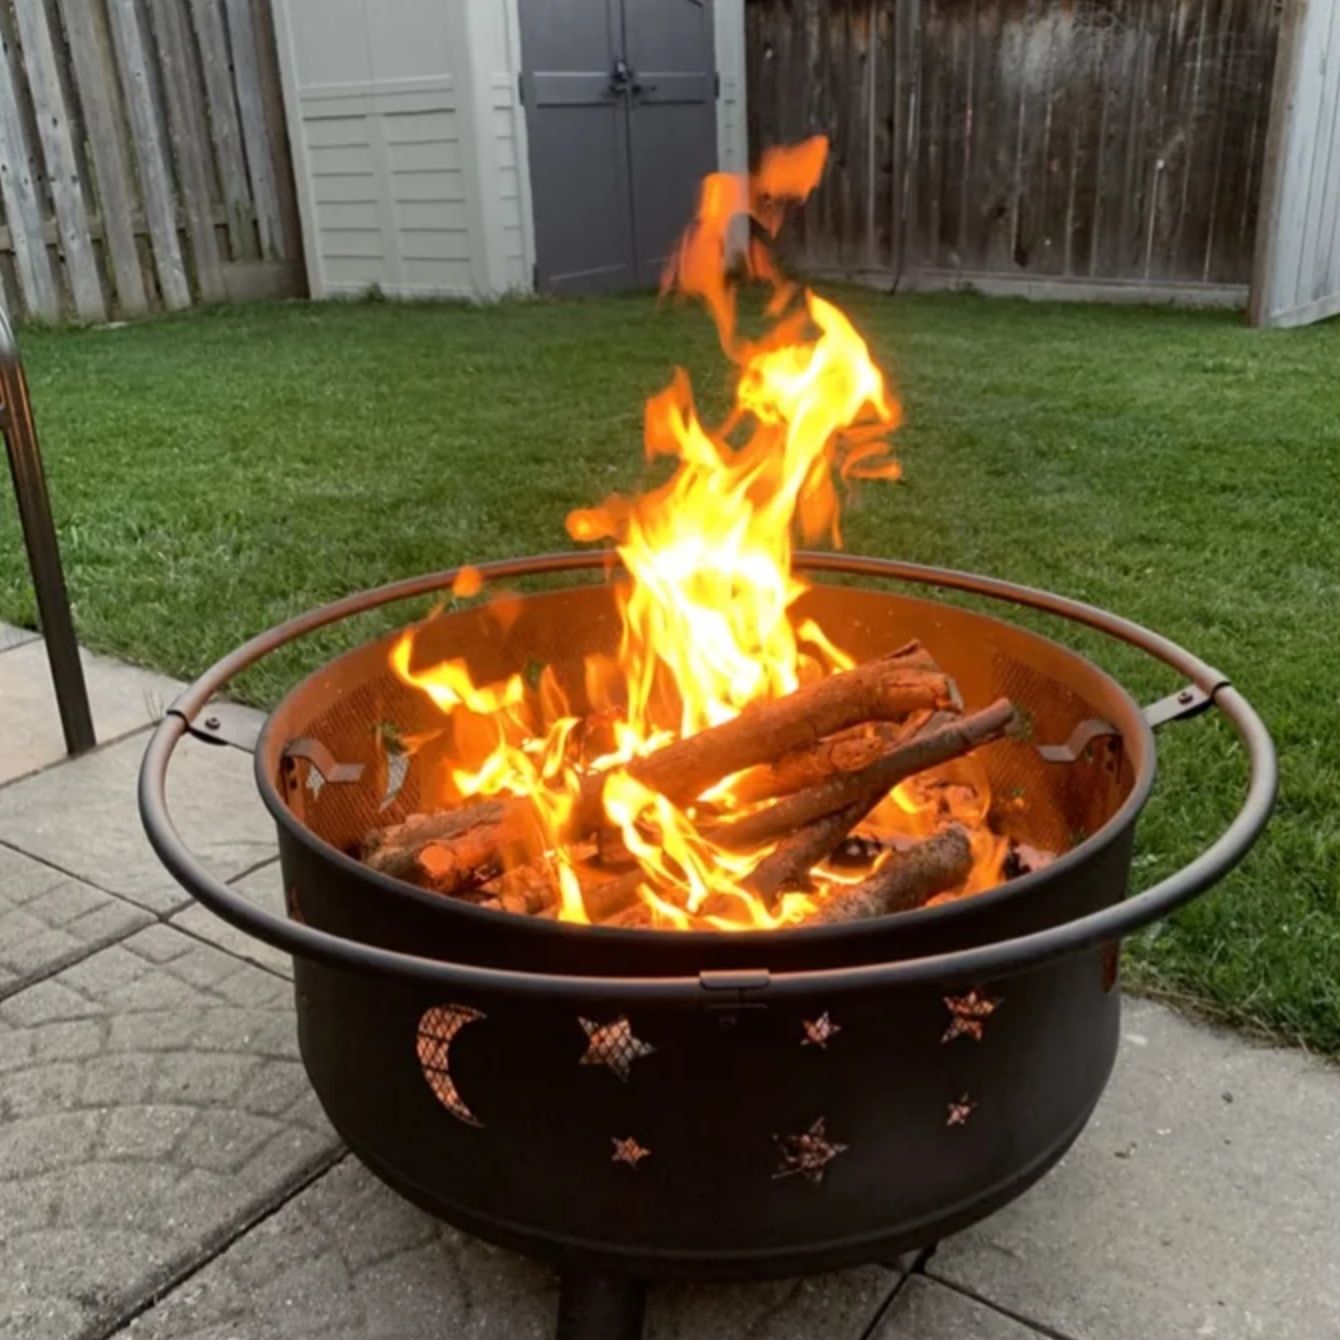 the fire pit with a fire in it